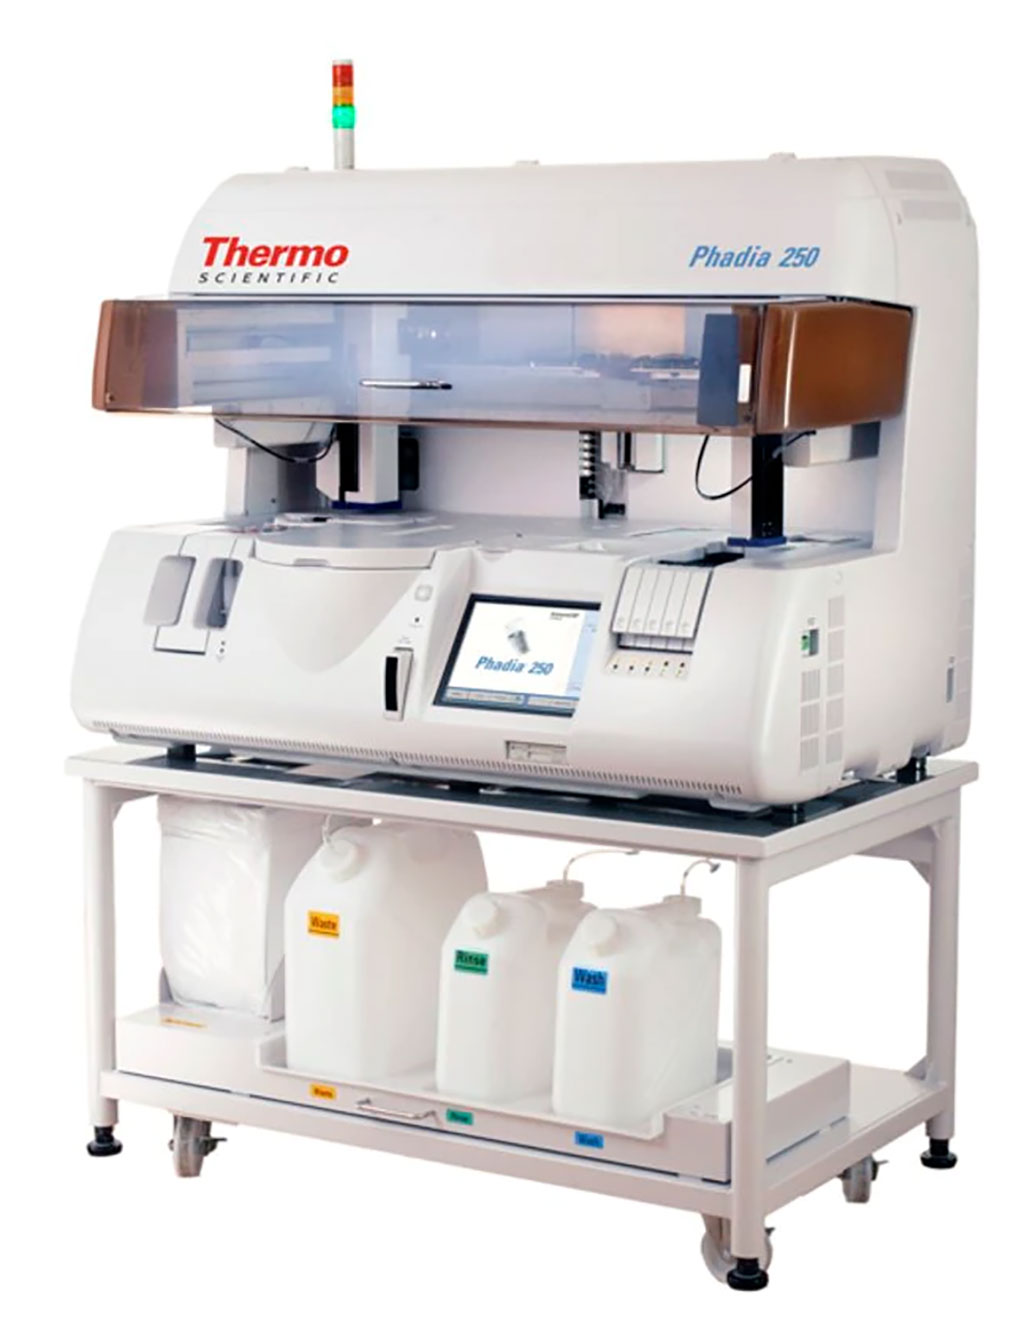 Image: The Phadia 250 Immunoassay Analyzer, in addition to allergy testing, allows measurement of autoantibodies of more than 20 autoimmune related diseases using the EliA product line (Photo courtesy of Thermo Fisher Scientific)